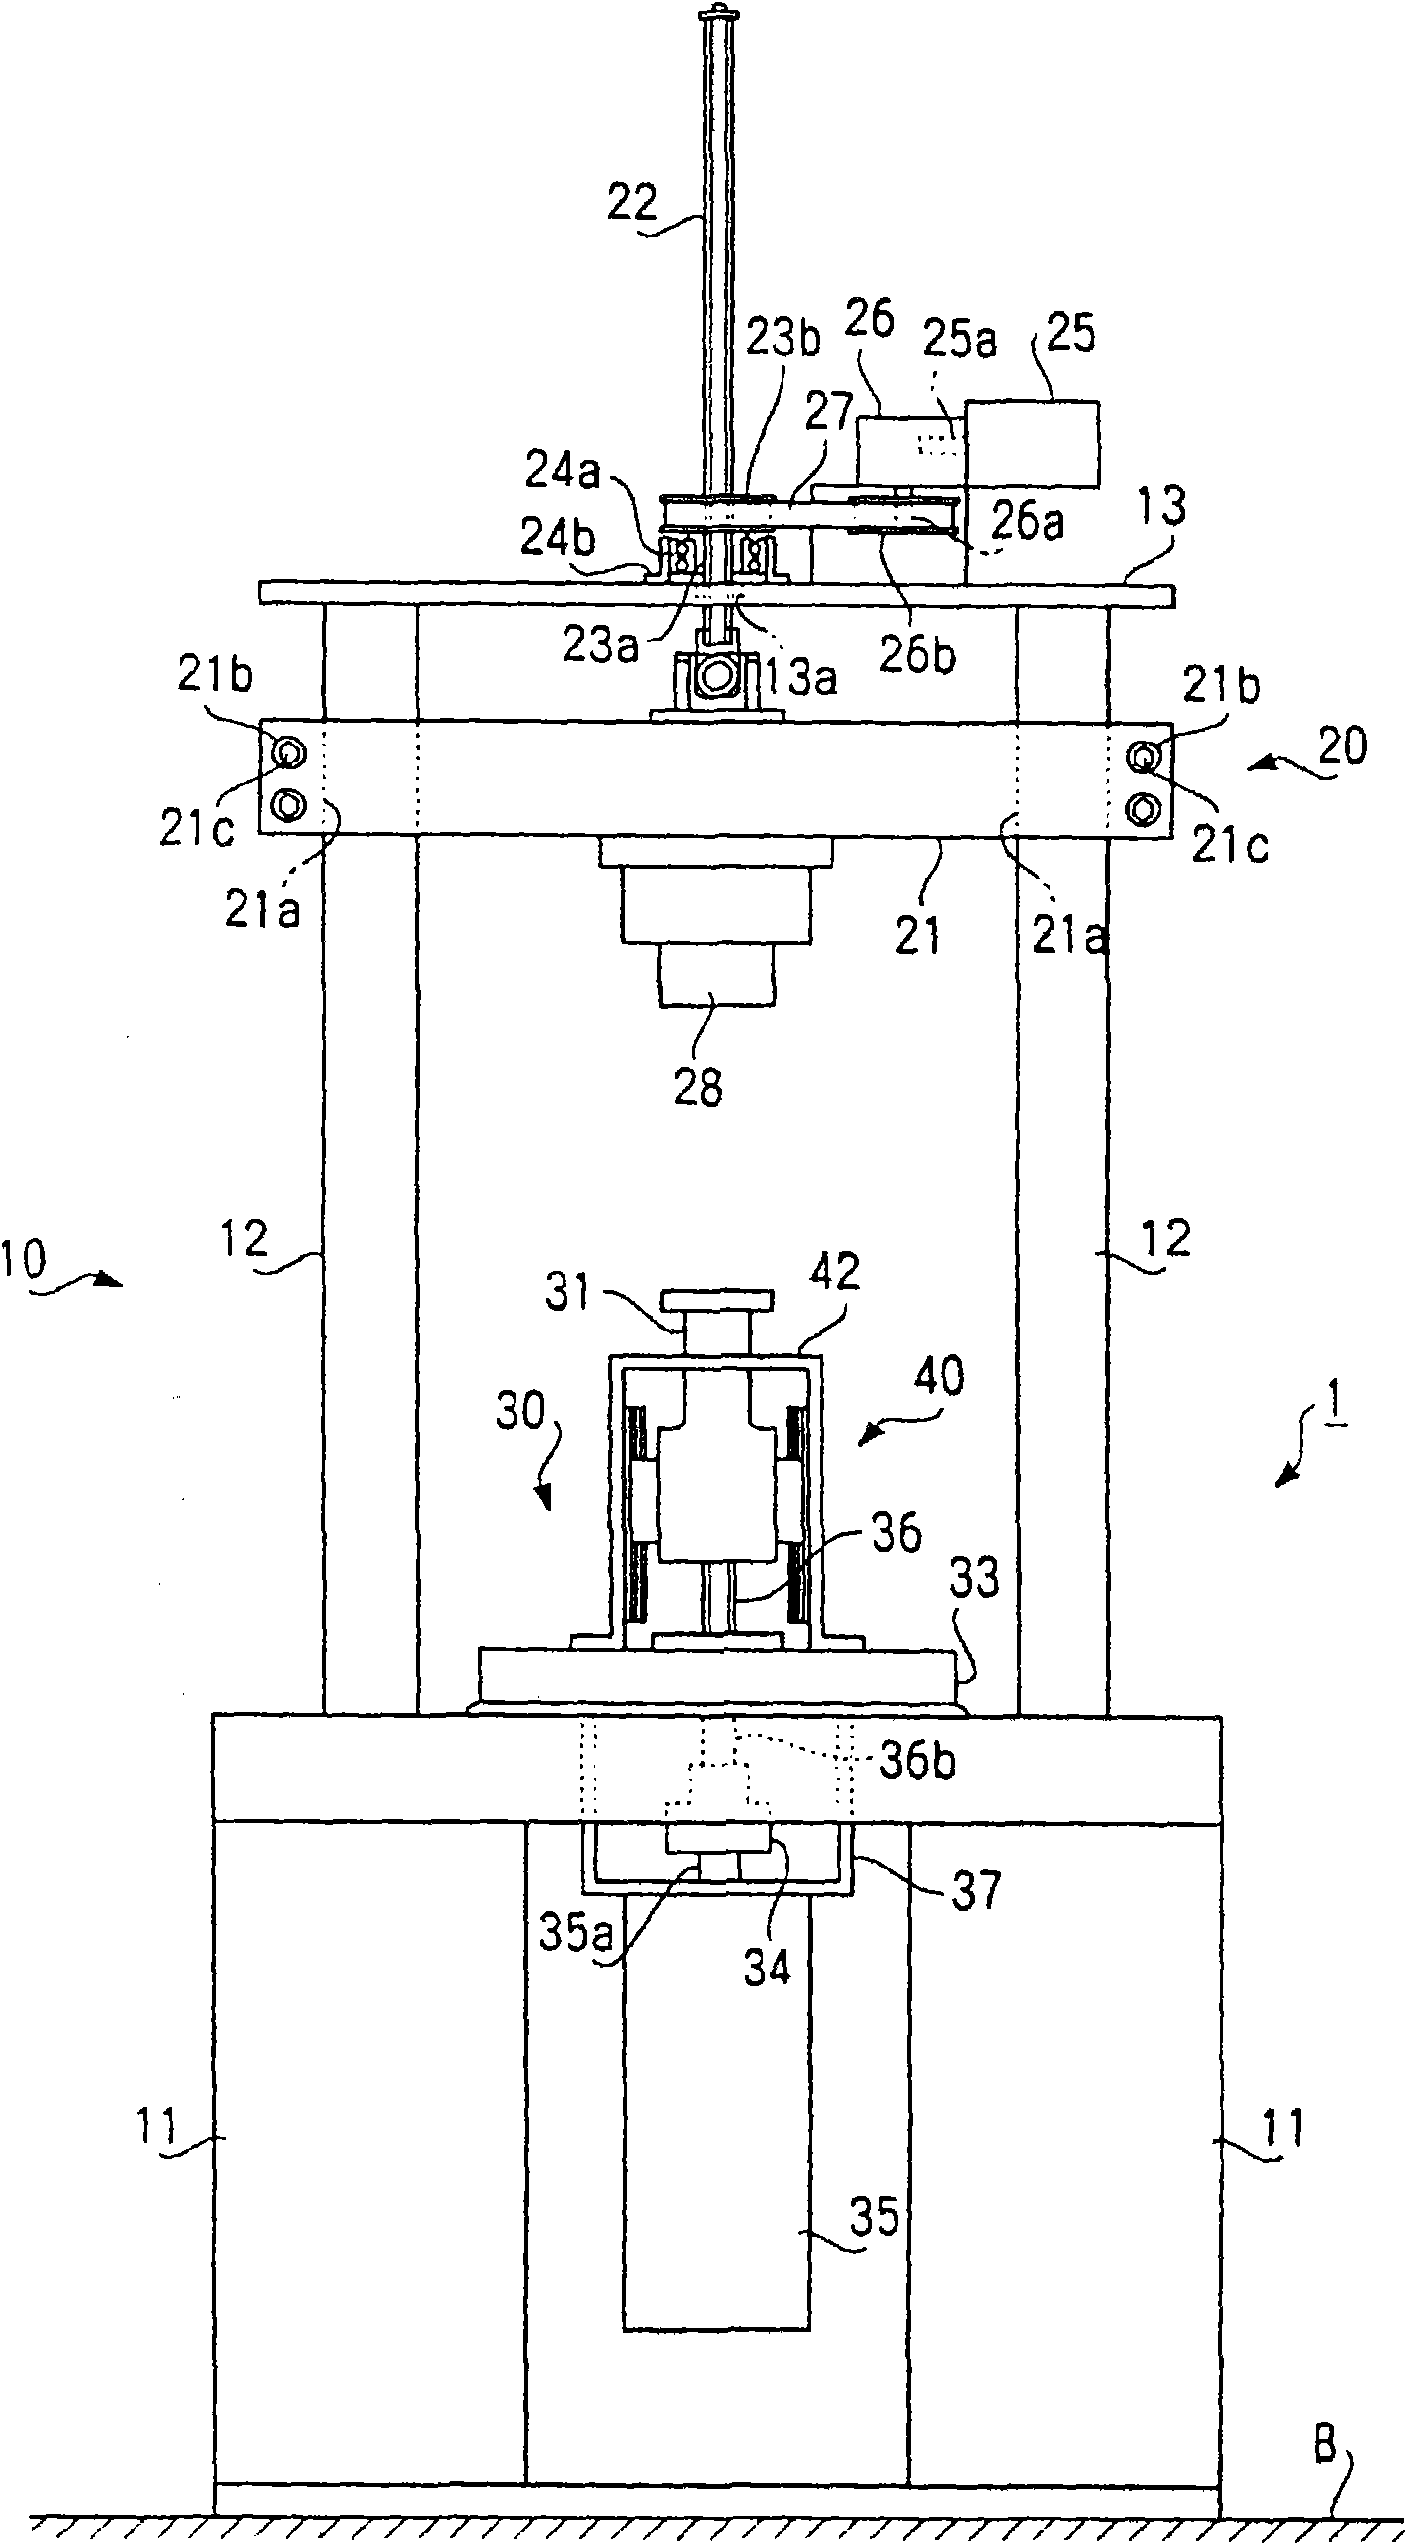 General-purpose test device, linear actuator, and twist test device